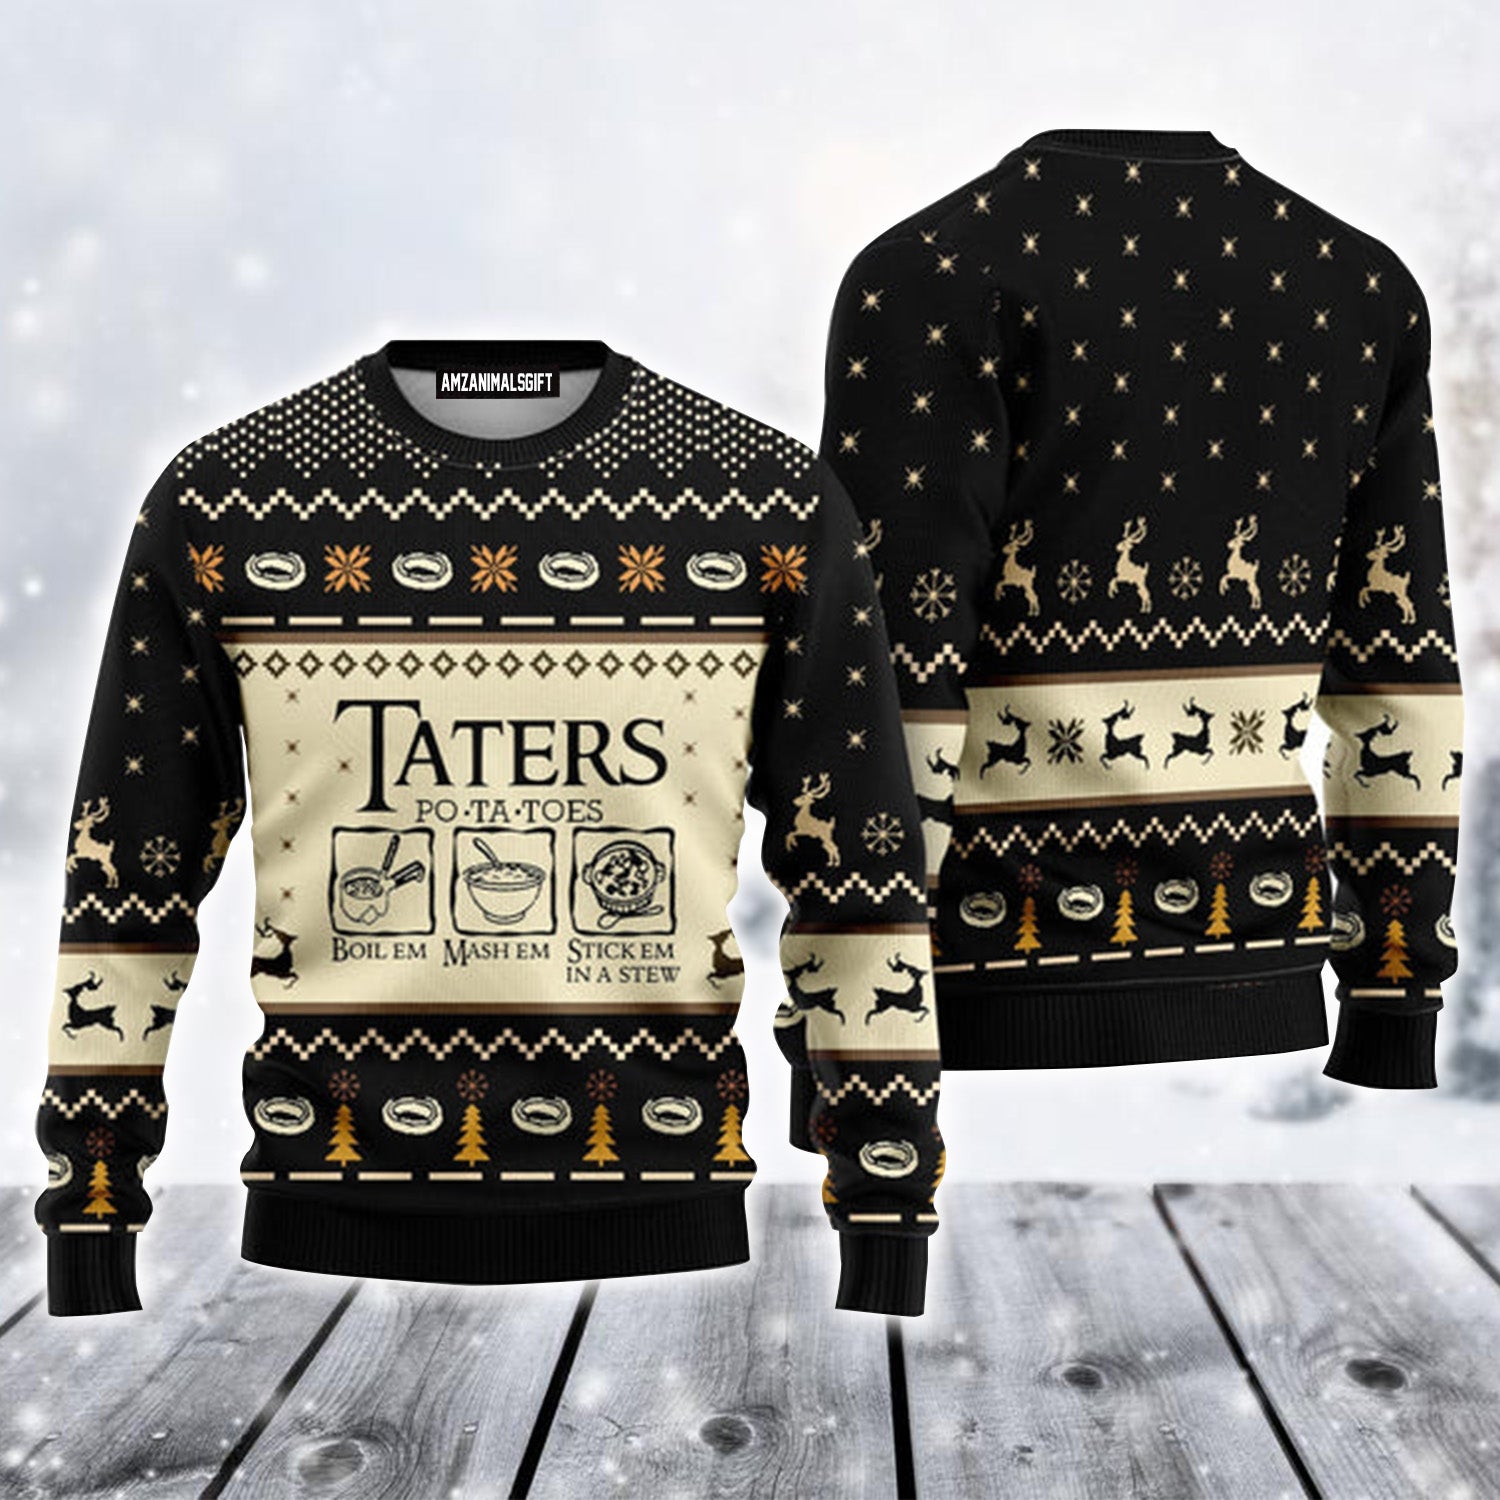 LOTR Christmas Potatoes Taters Black Urly Christmas Sweater, Christmas Sweater For Men & Women - Perfect Gift For Christmas, Family, Friends